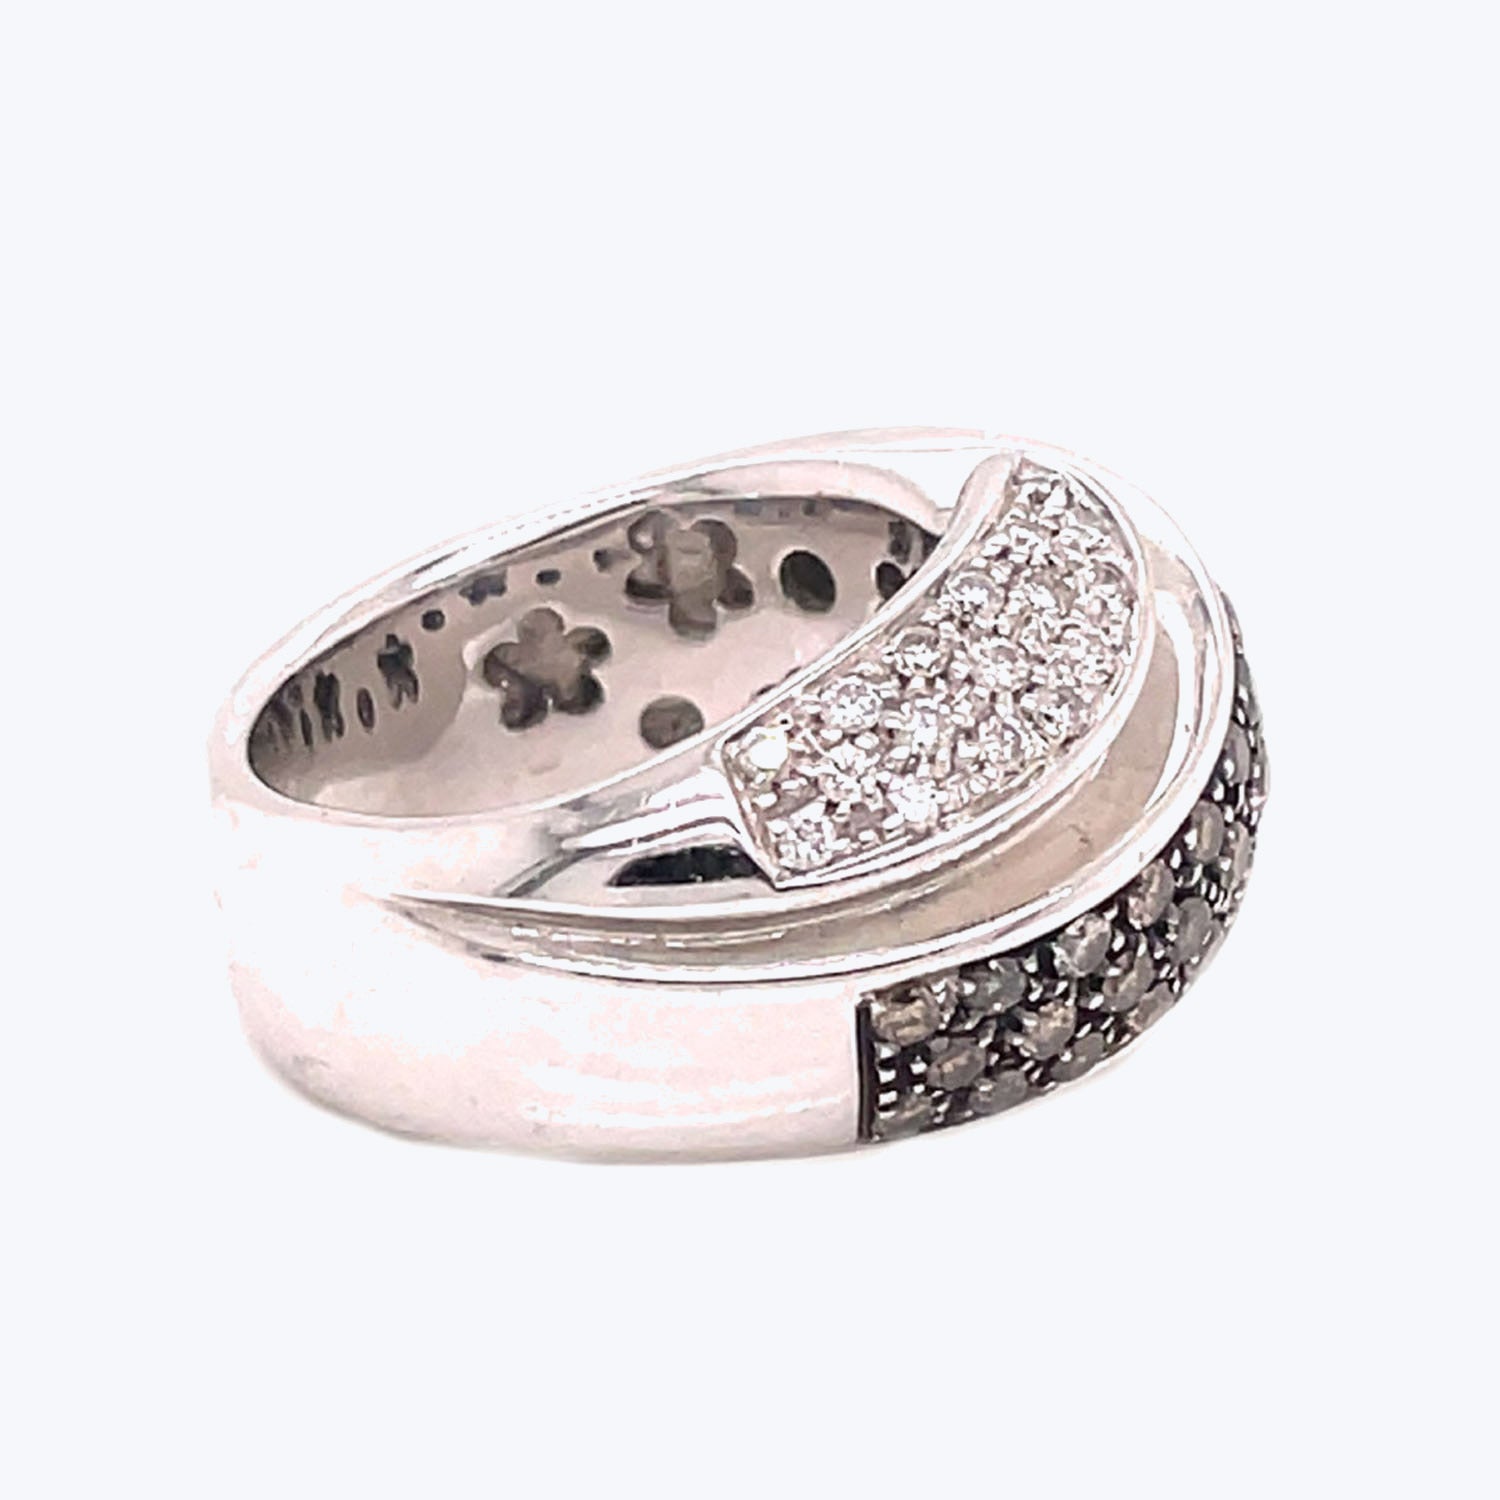 Intricately designed silver ring with sparkling diamond and black stone accents.